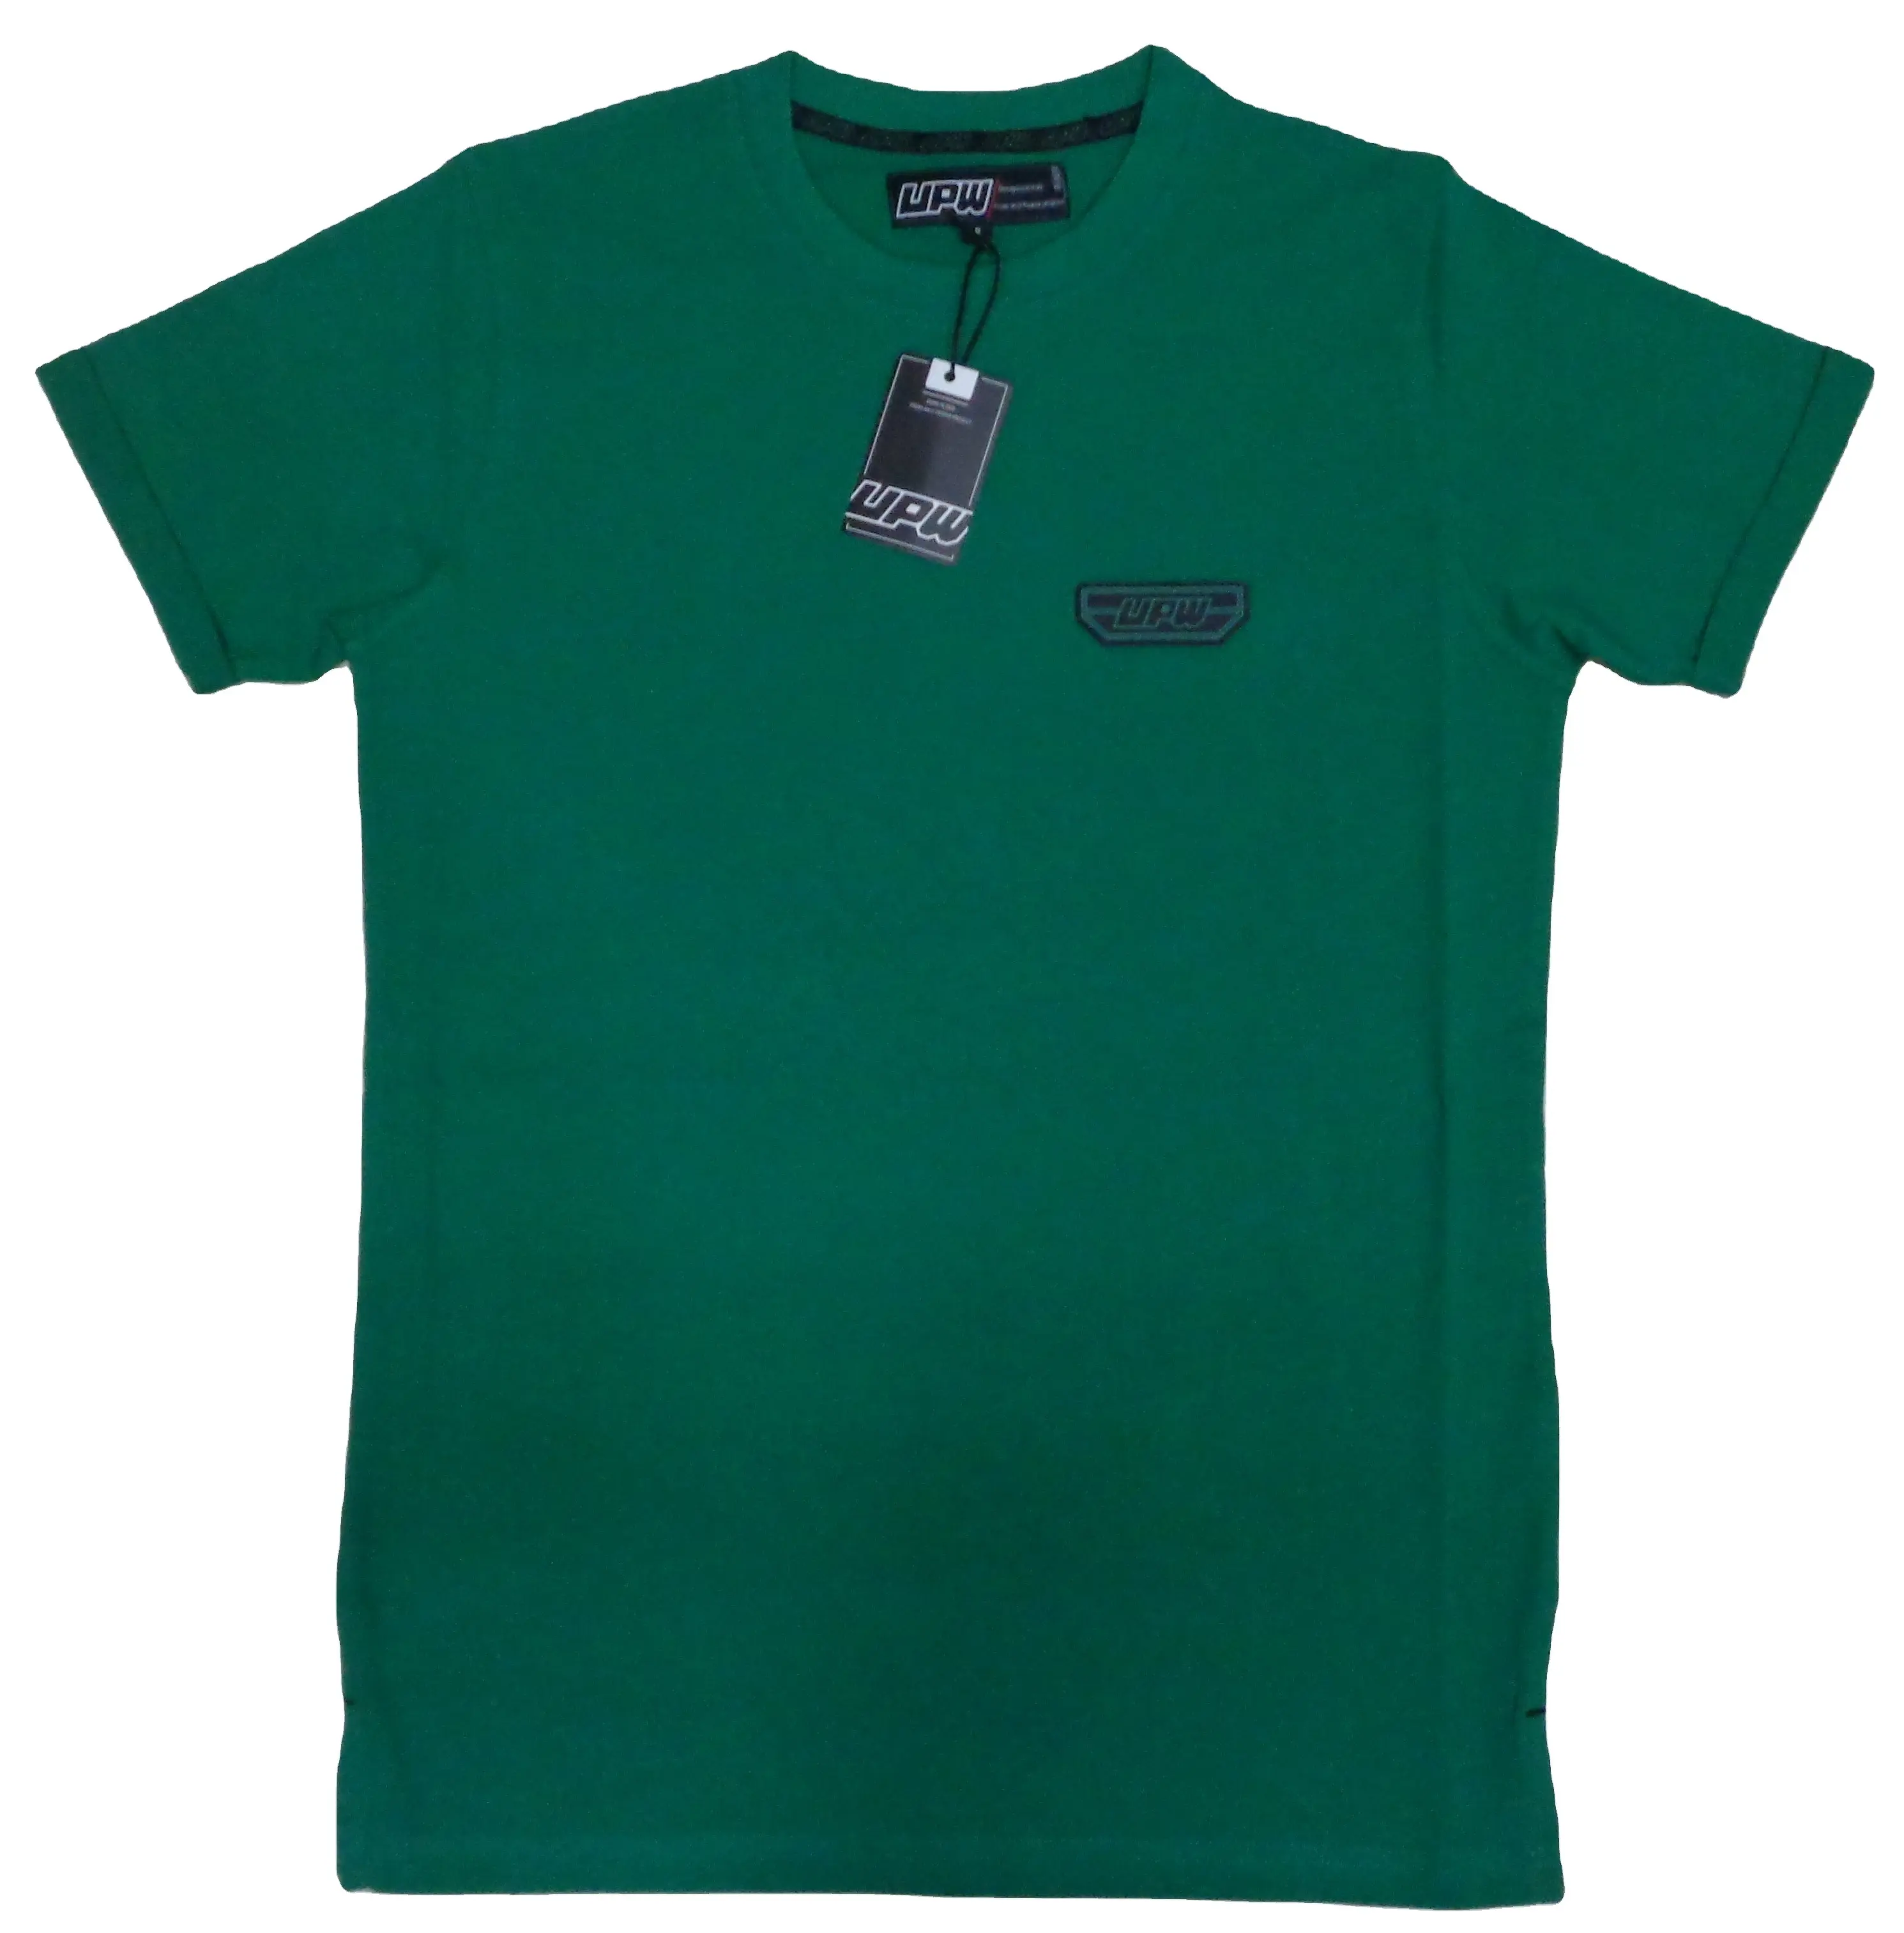 Men's Printed T-Shirts (With Attached PVC Rubber Patch)